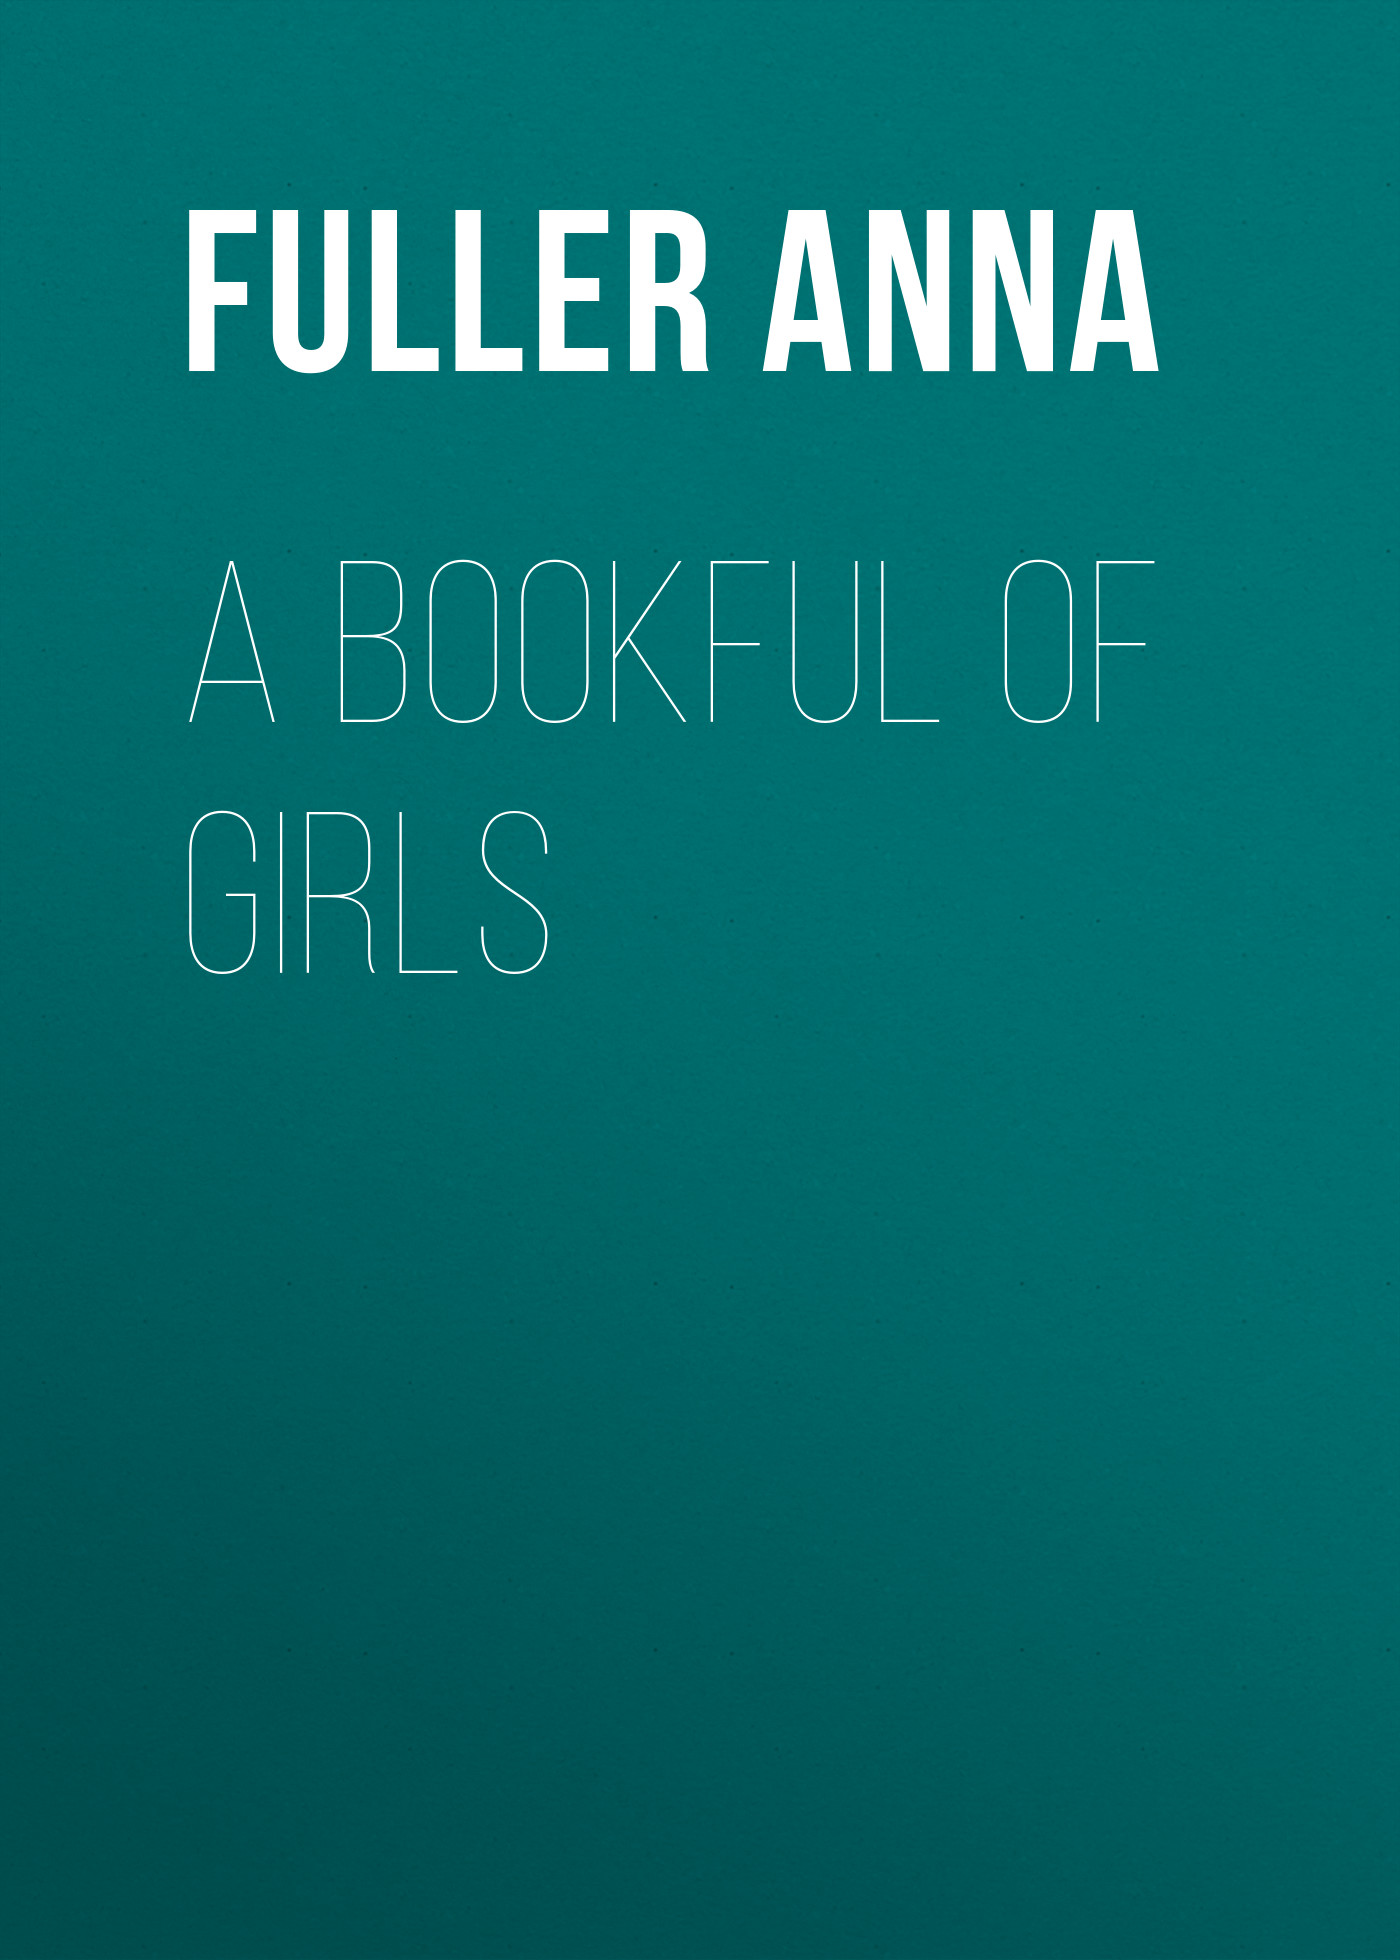 A Bookful of Girls